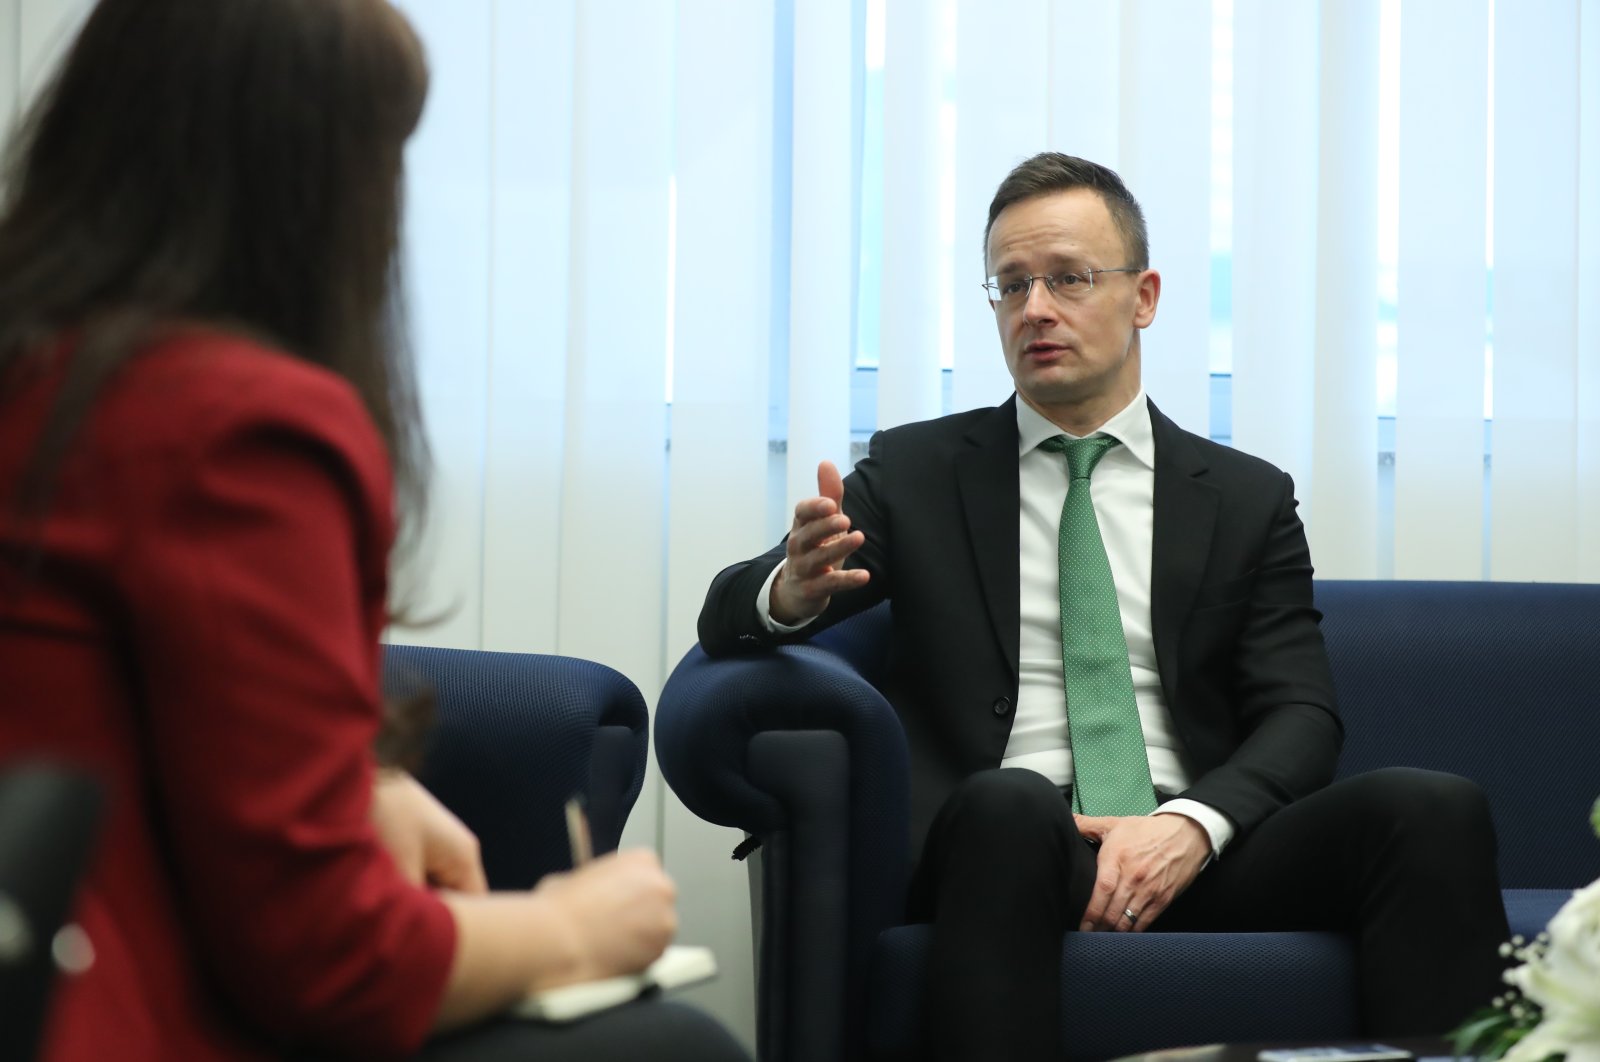 Hungarian Minister of Foreign Affairs and Trade Peter Szijjarto during an interview with the Sabah daily, the capital Ankara, Turkey, Feb. 8, 2021. (Sabah Photo)